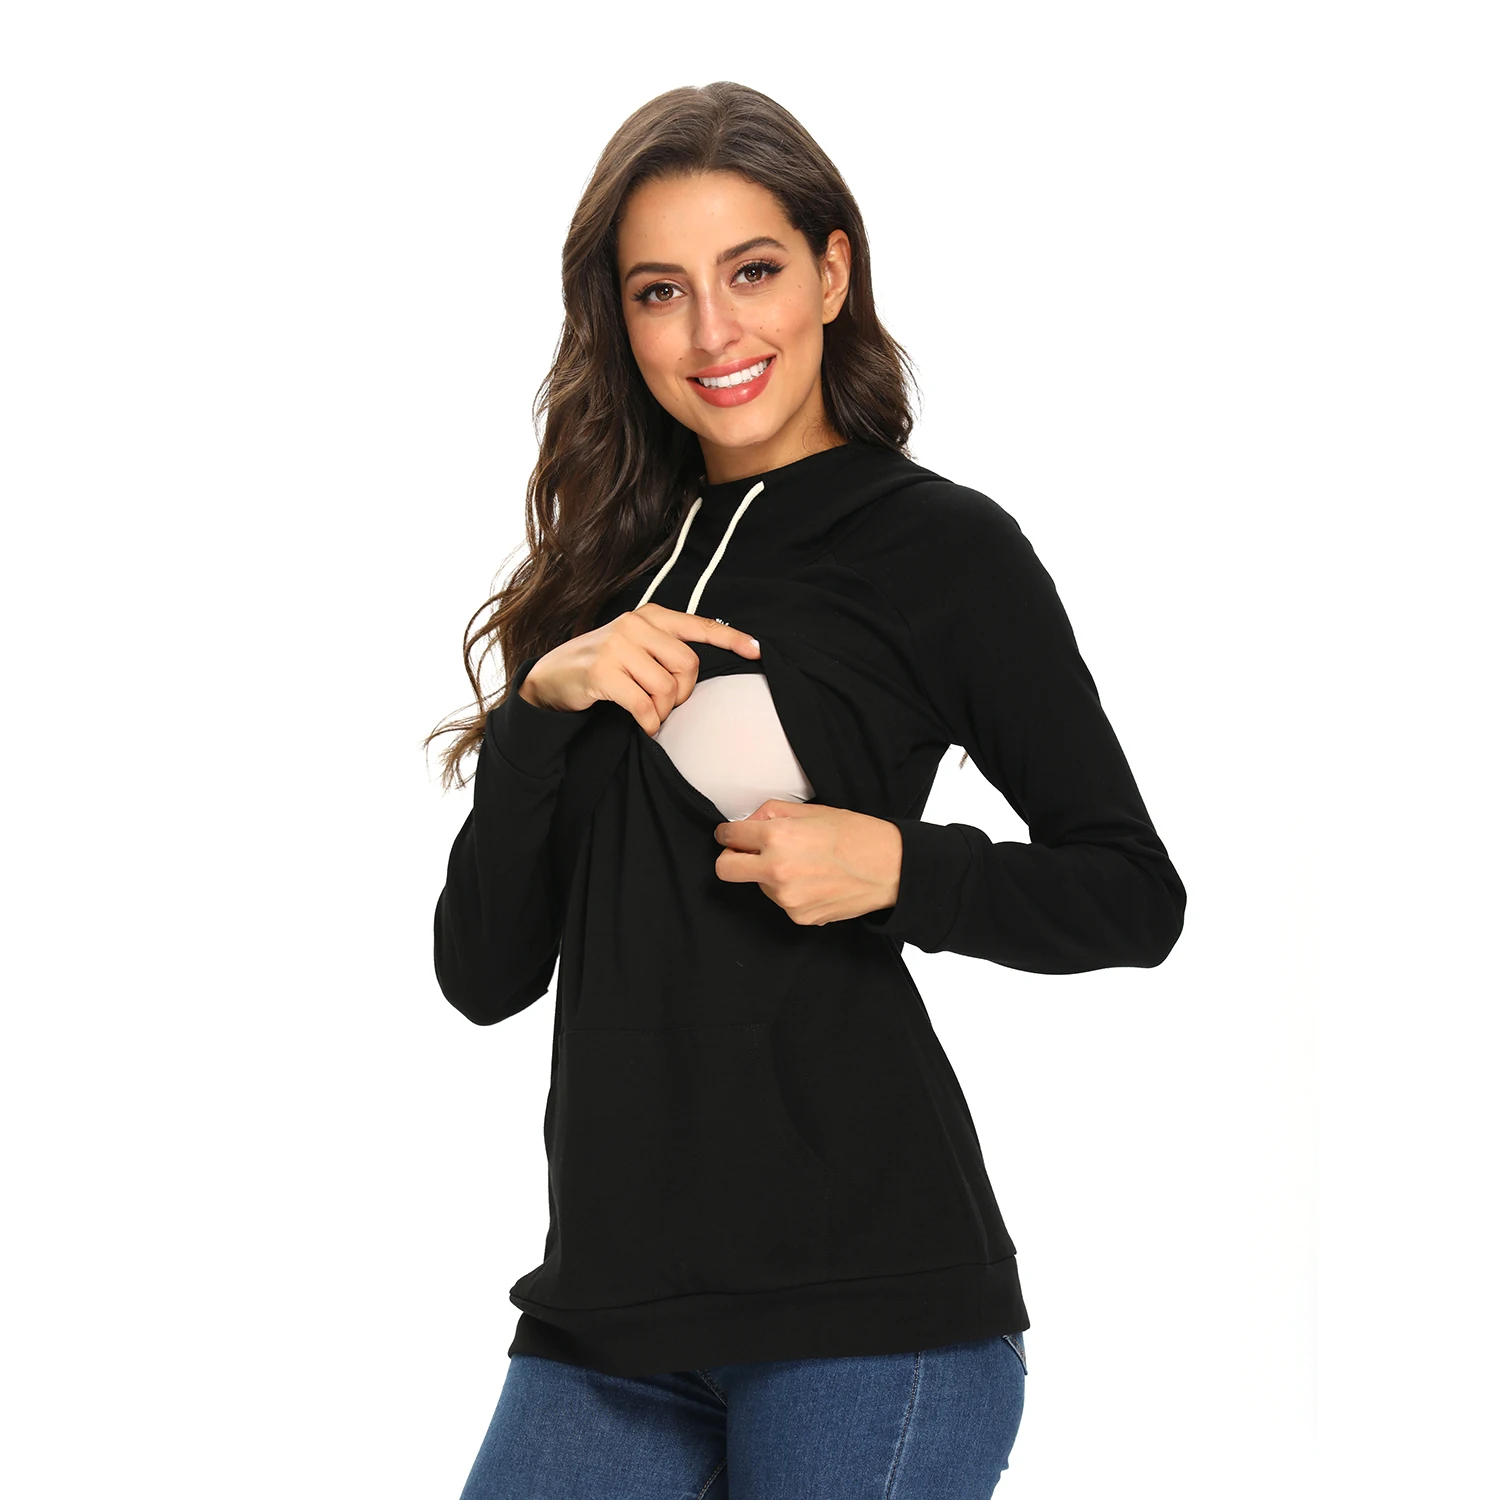 Pregnancy Women Clothes Hoodie Drawstring Maternity Tops Long Sleeve Breastfeeding Loose Casual Nursing T-Shirts with Pocket enlarge